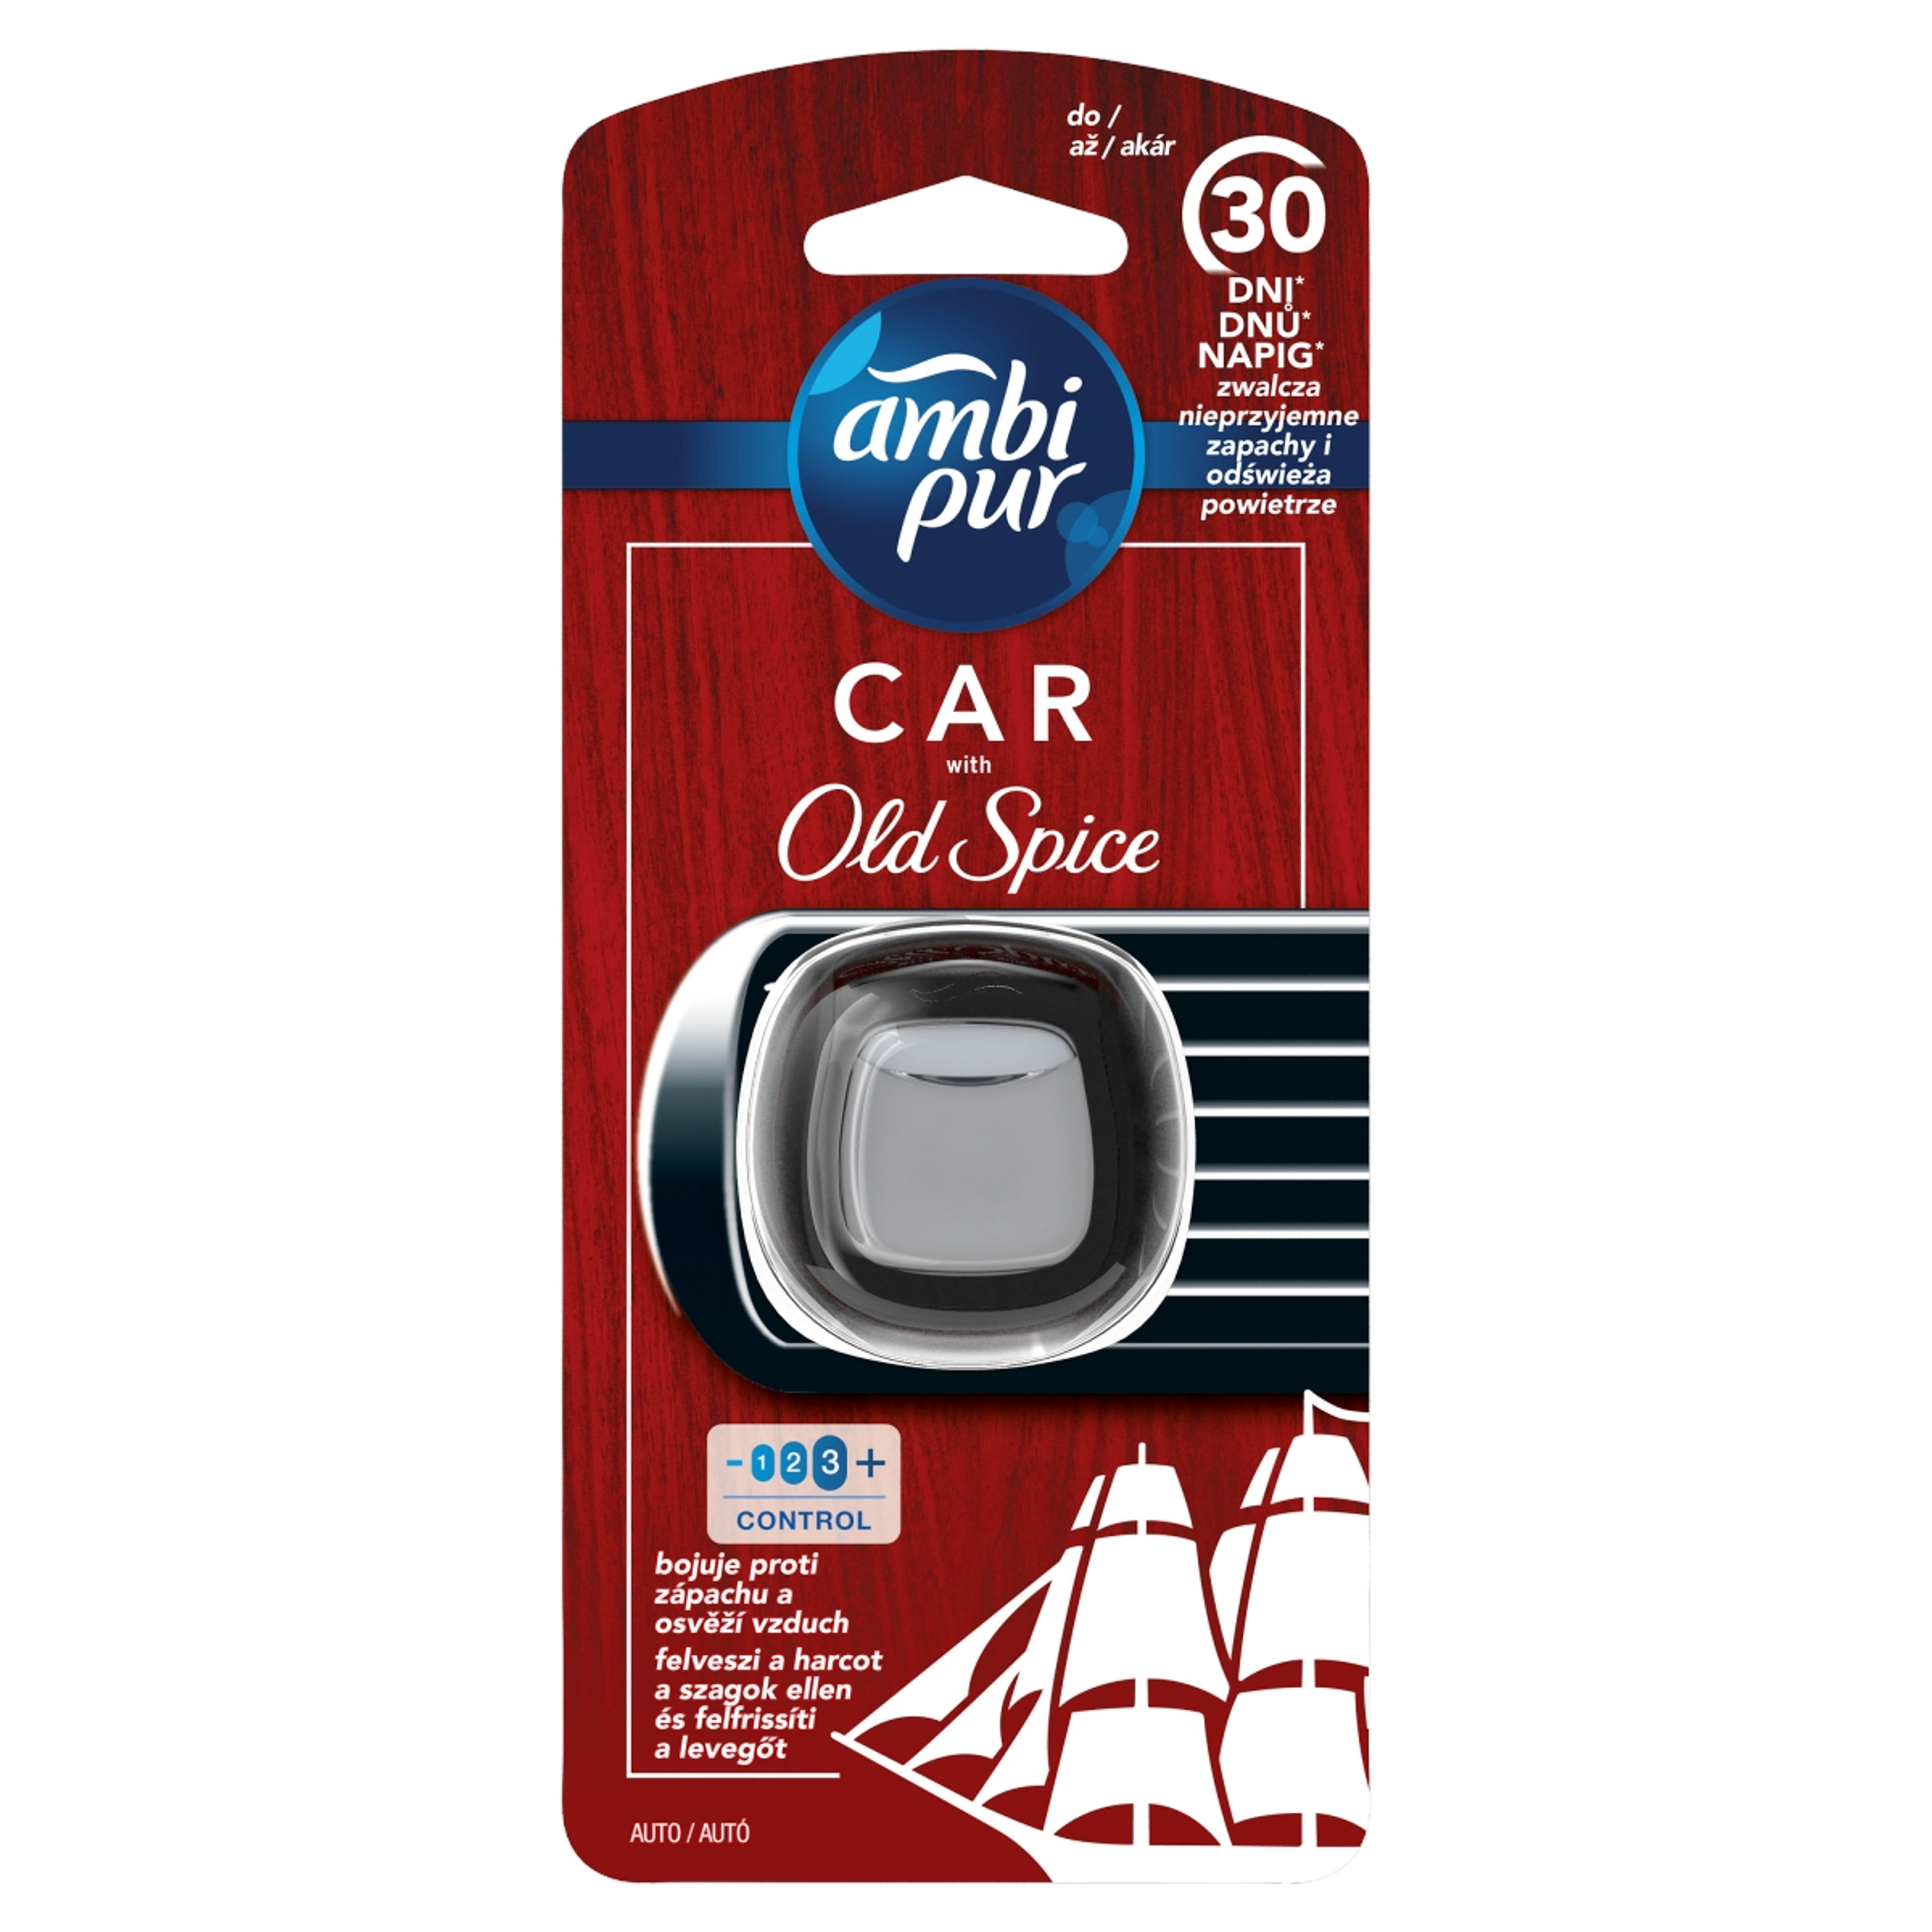 Ambi pur car old spice - 2 ml-1